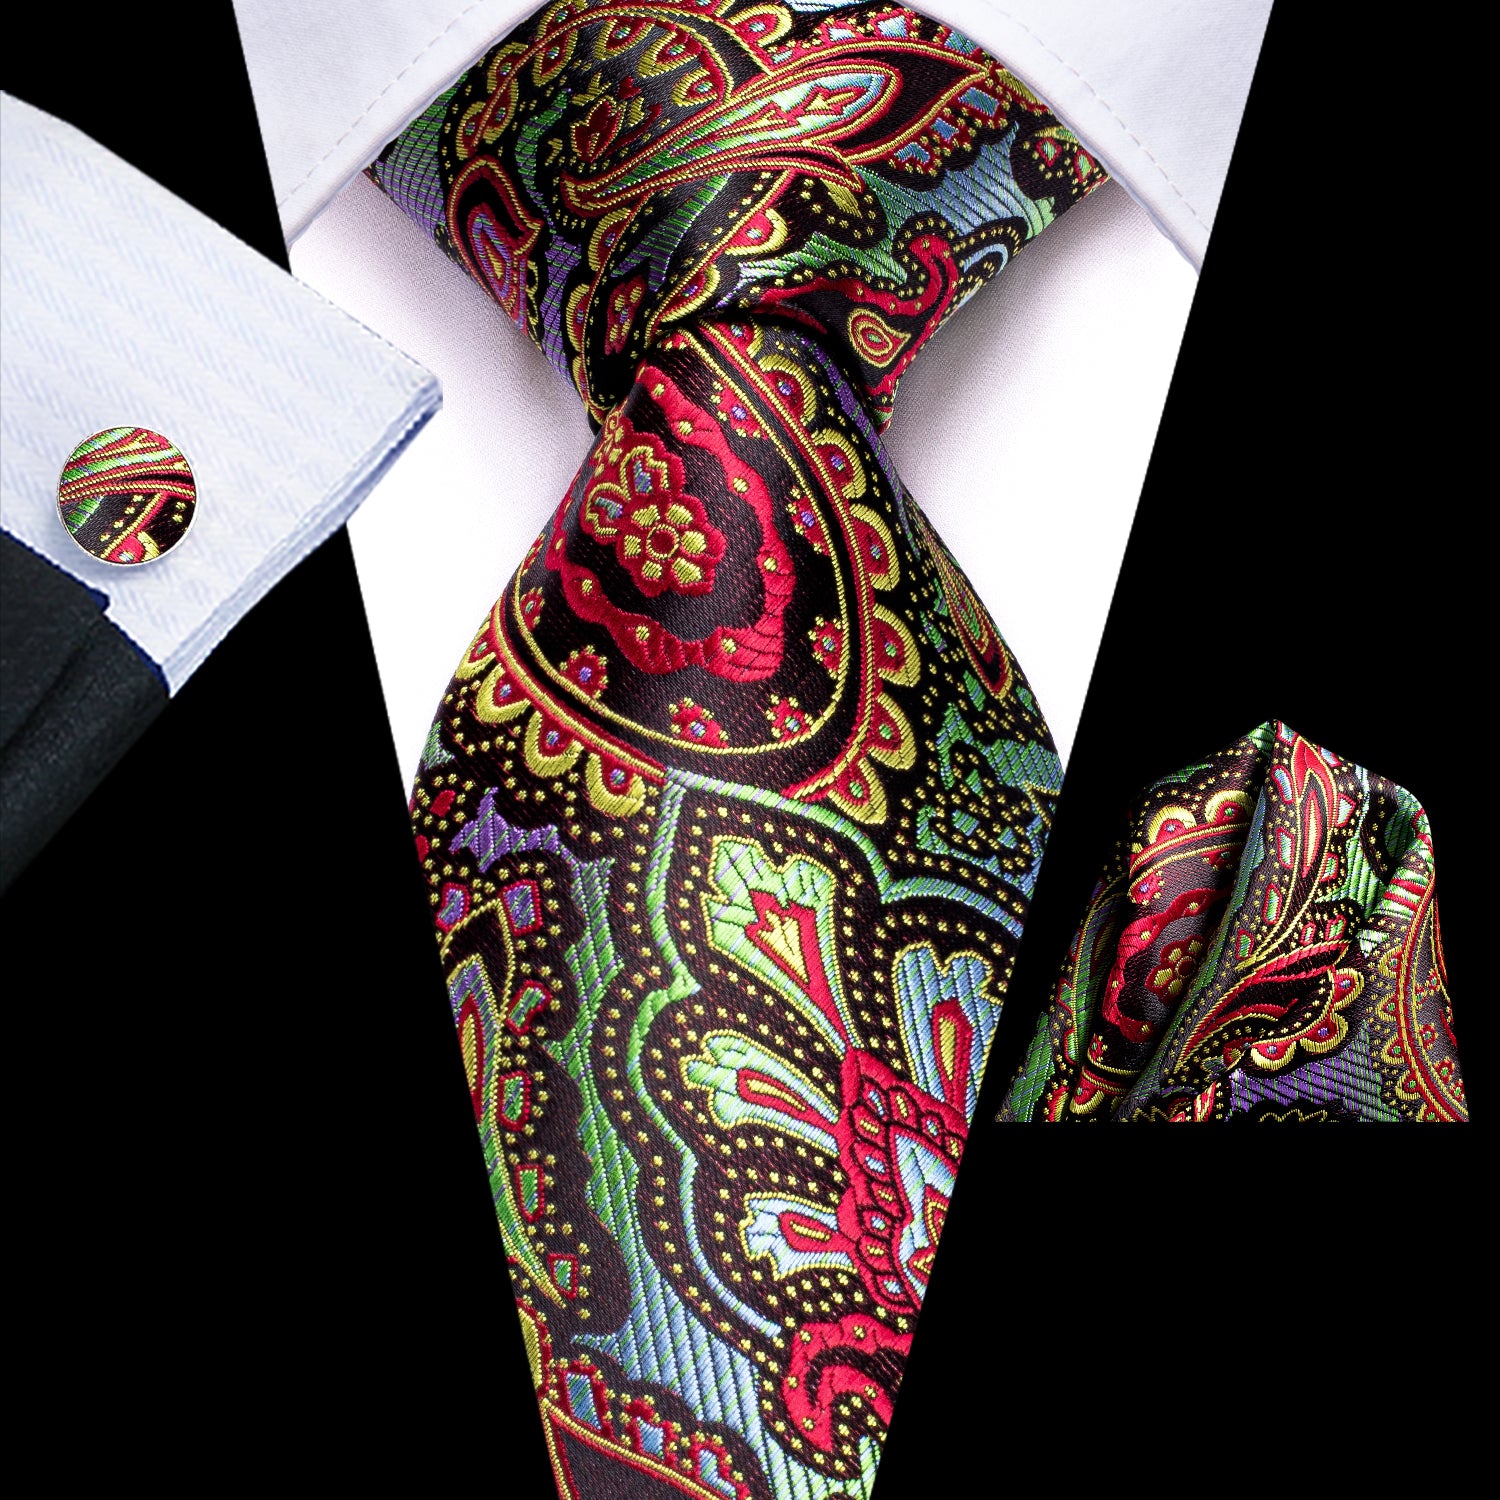 New Colorful Paisley Tie Pocket Square Cufflinks Set